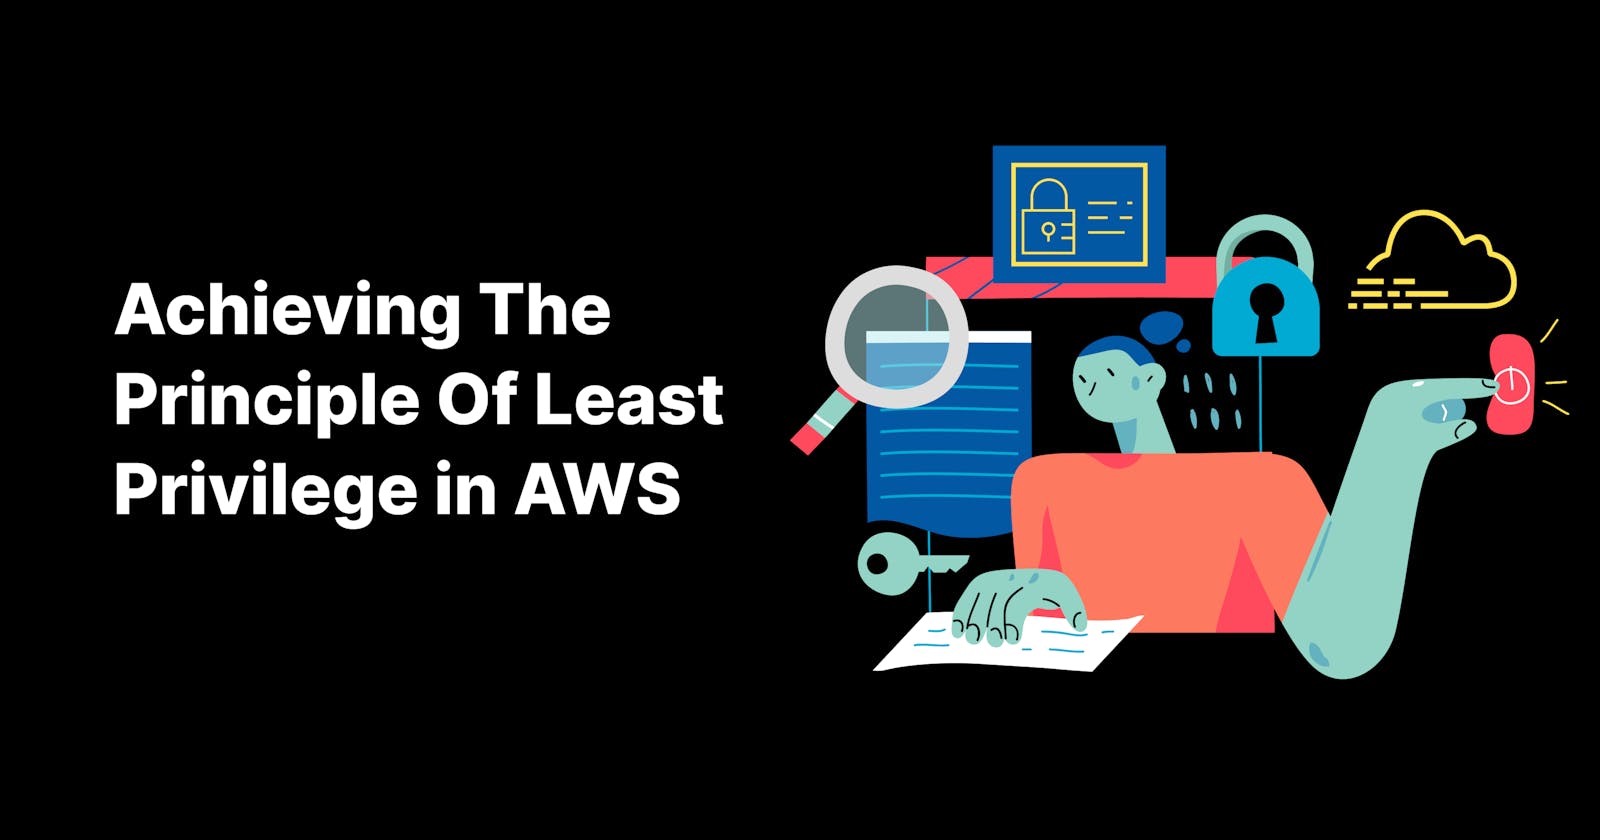 Achieving The Principle Of Least Privilege in AWS